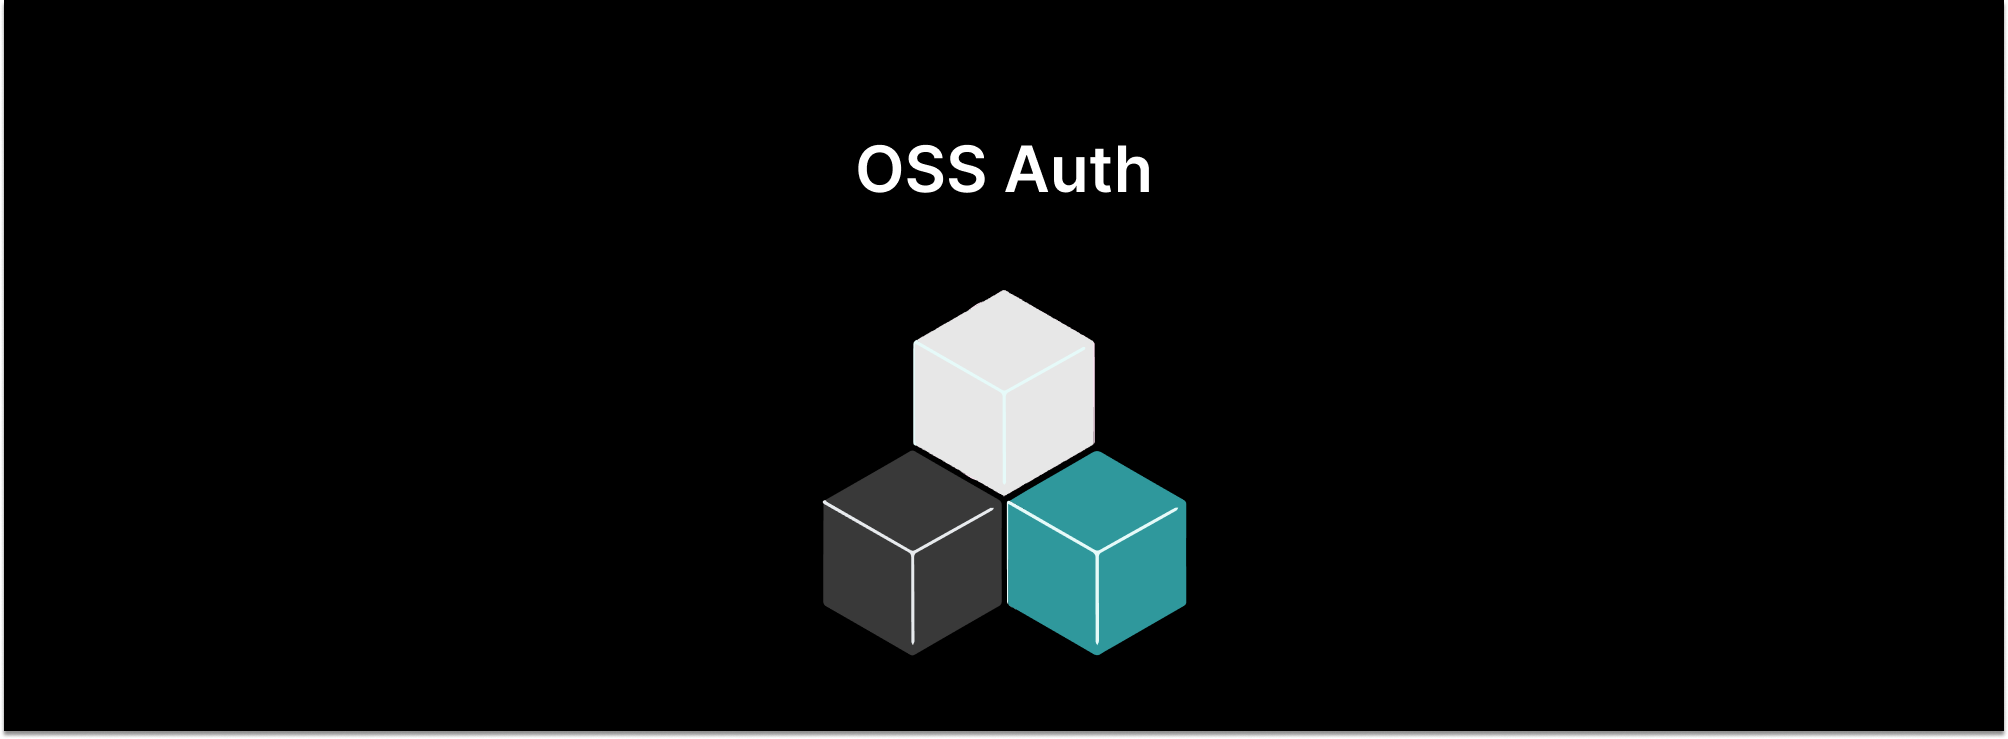 5 OSS projects to secure your application